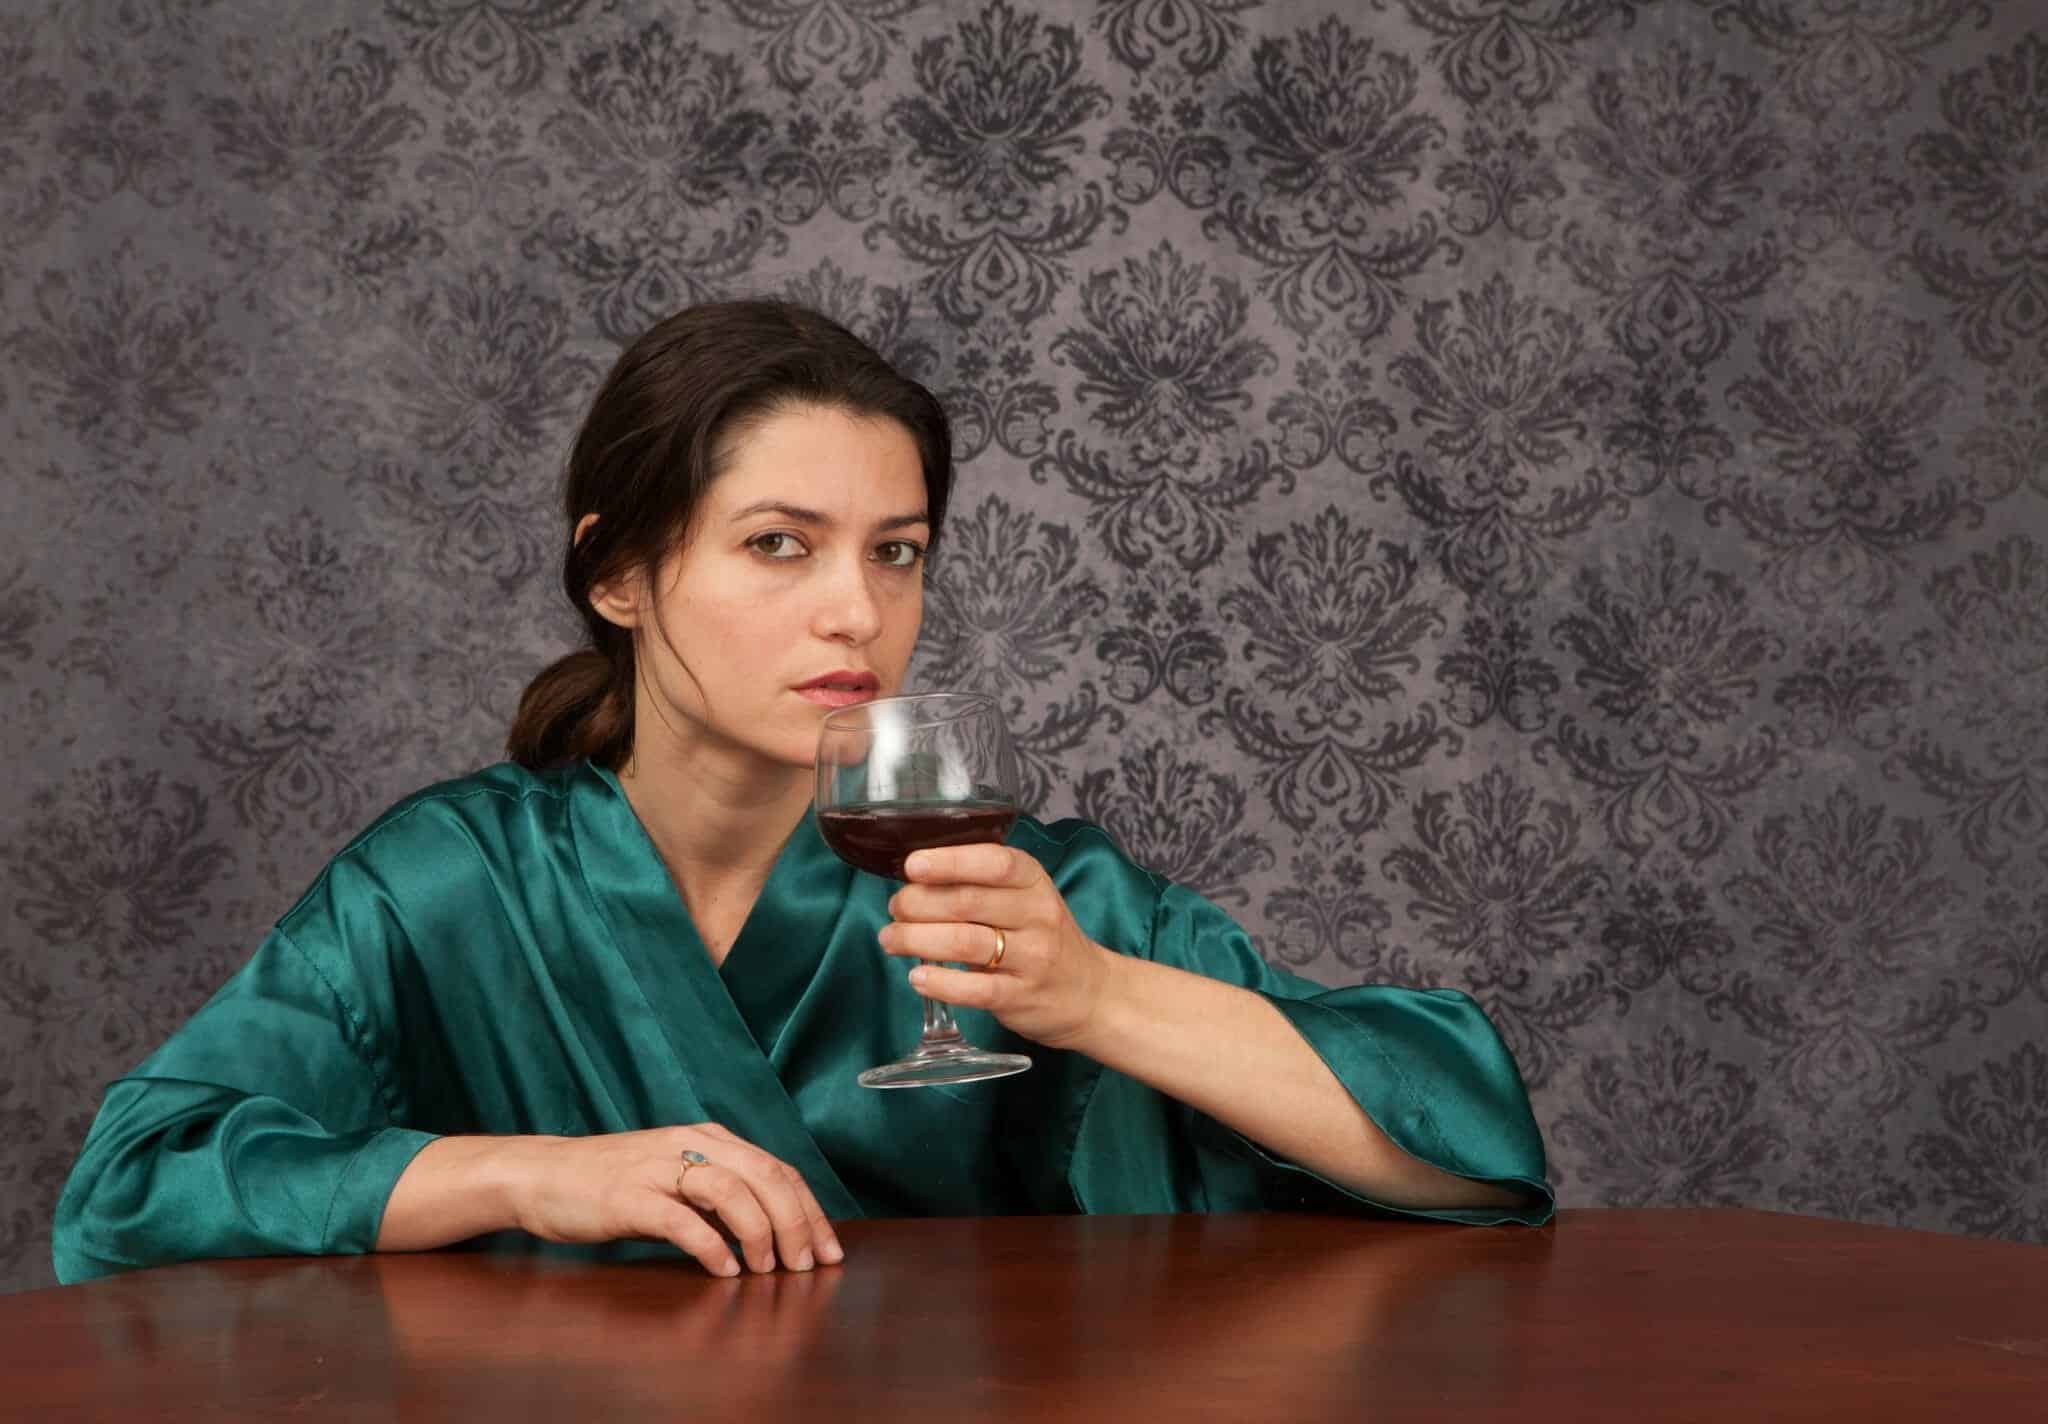 Woman looking at camera while drinking too much wine.